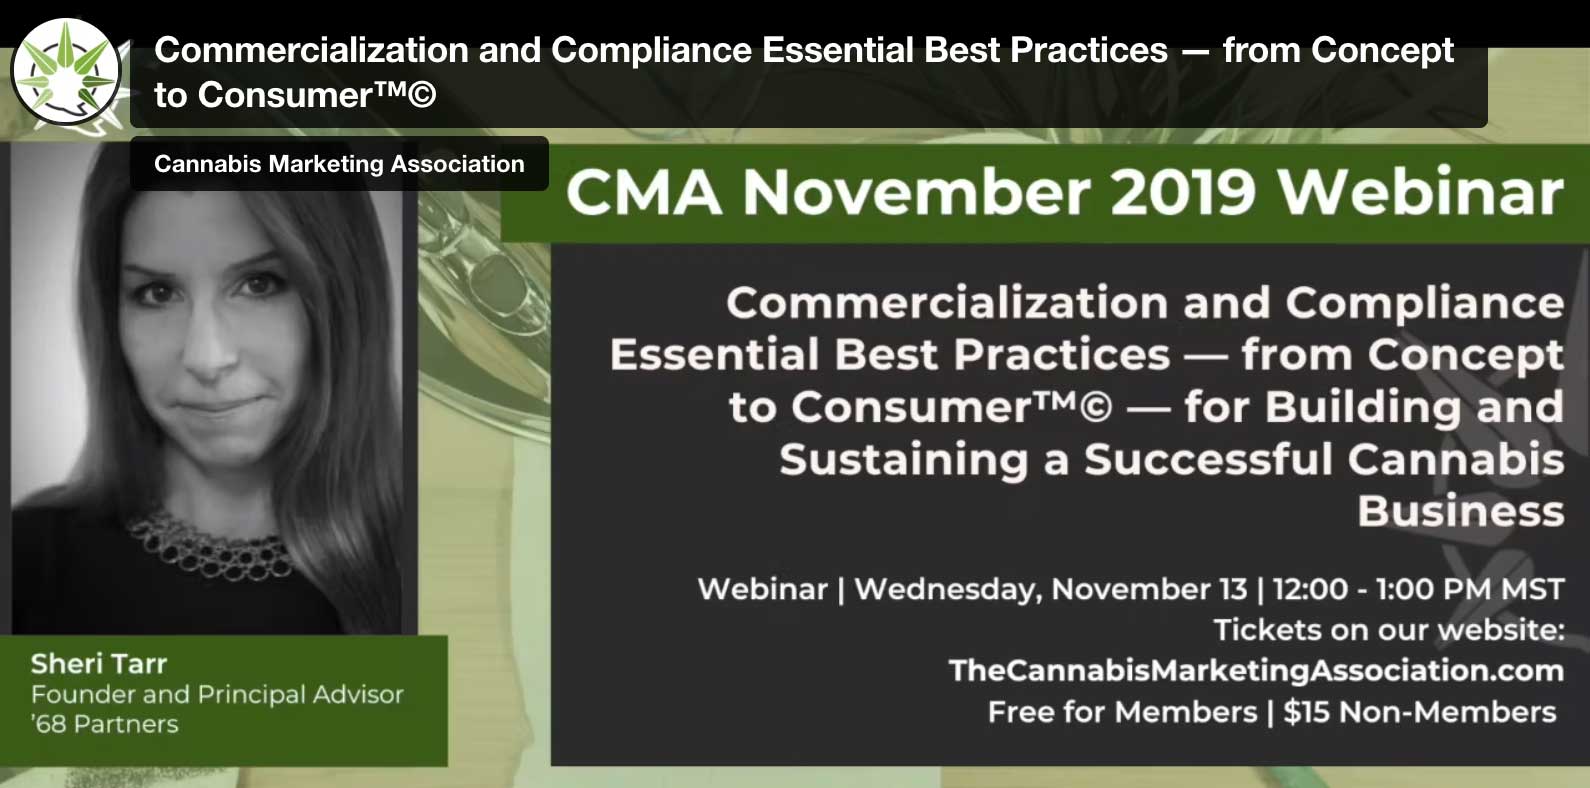 CMA: Commercialization and Compliance Essential Best Practices — from Concept to Consumer™